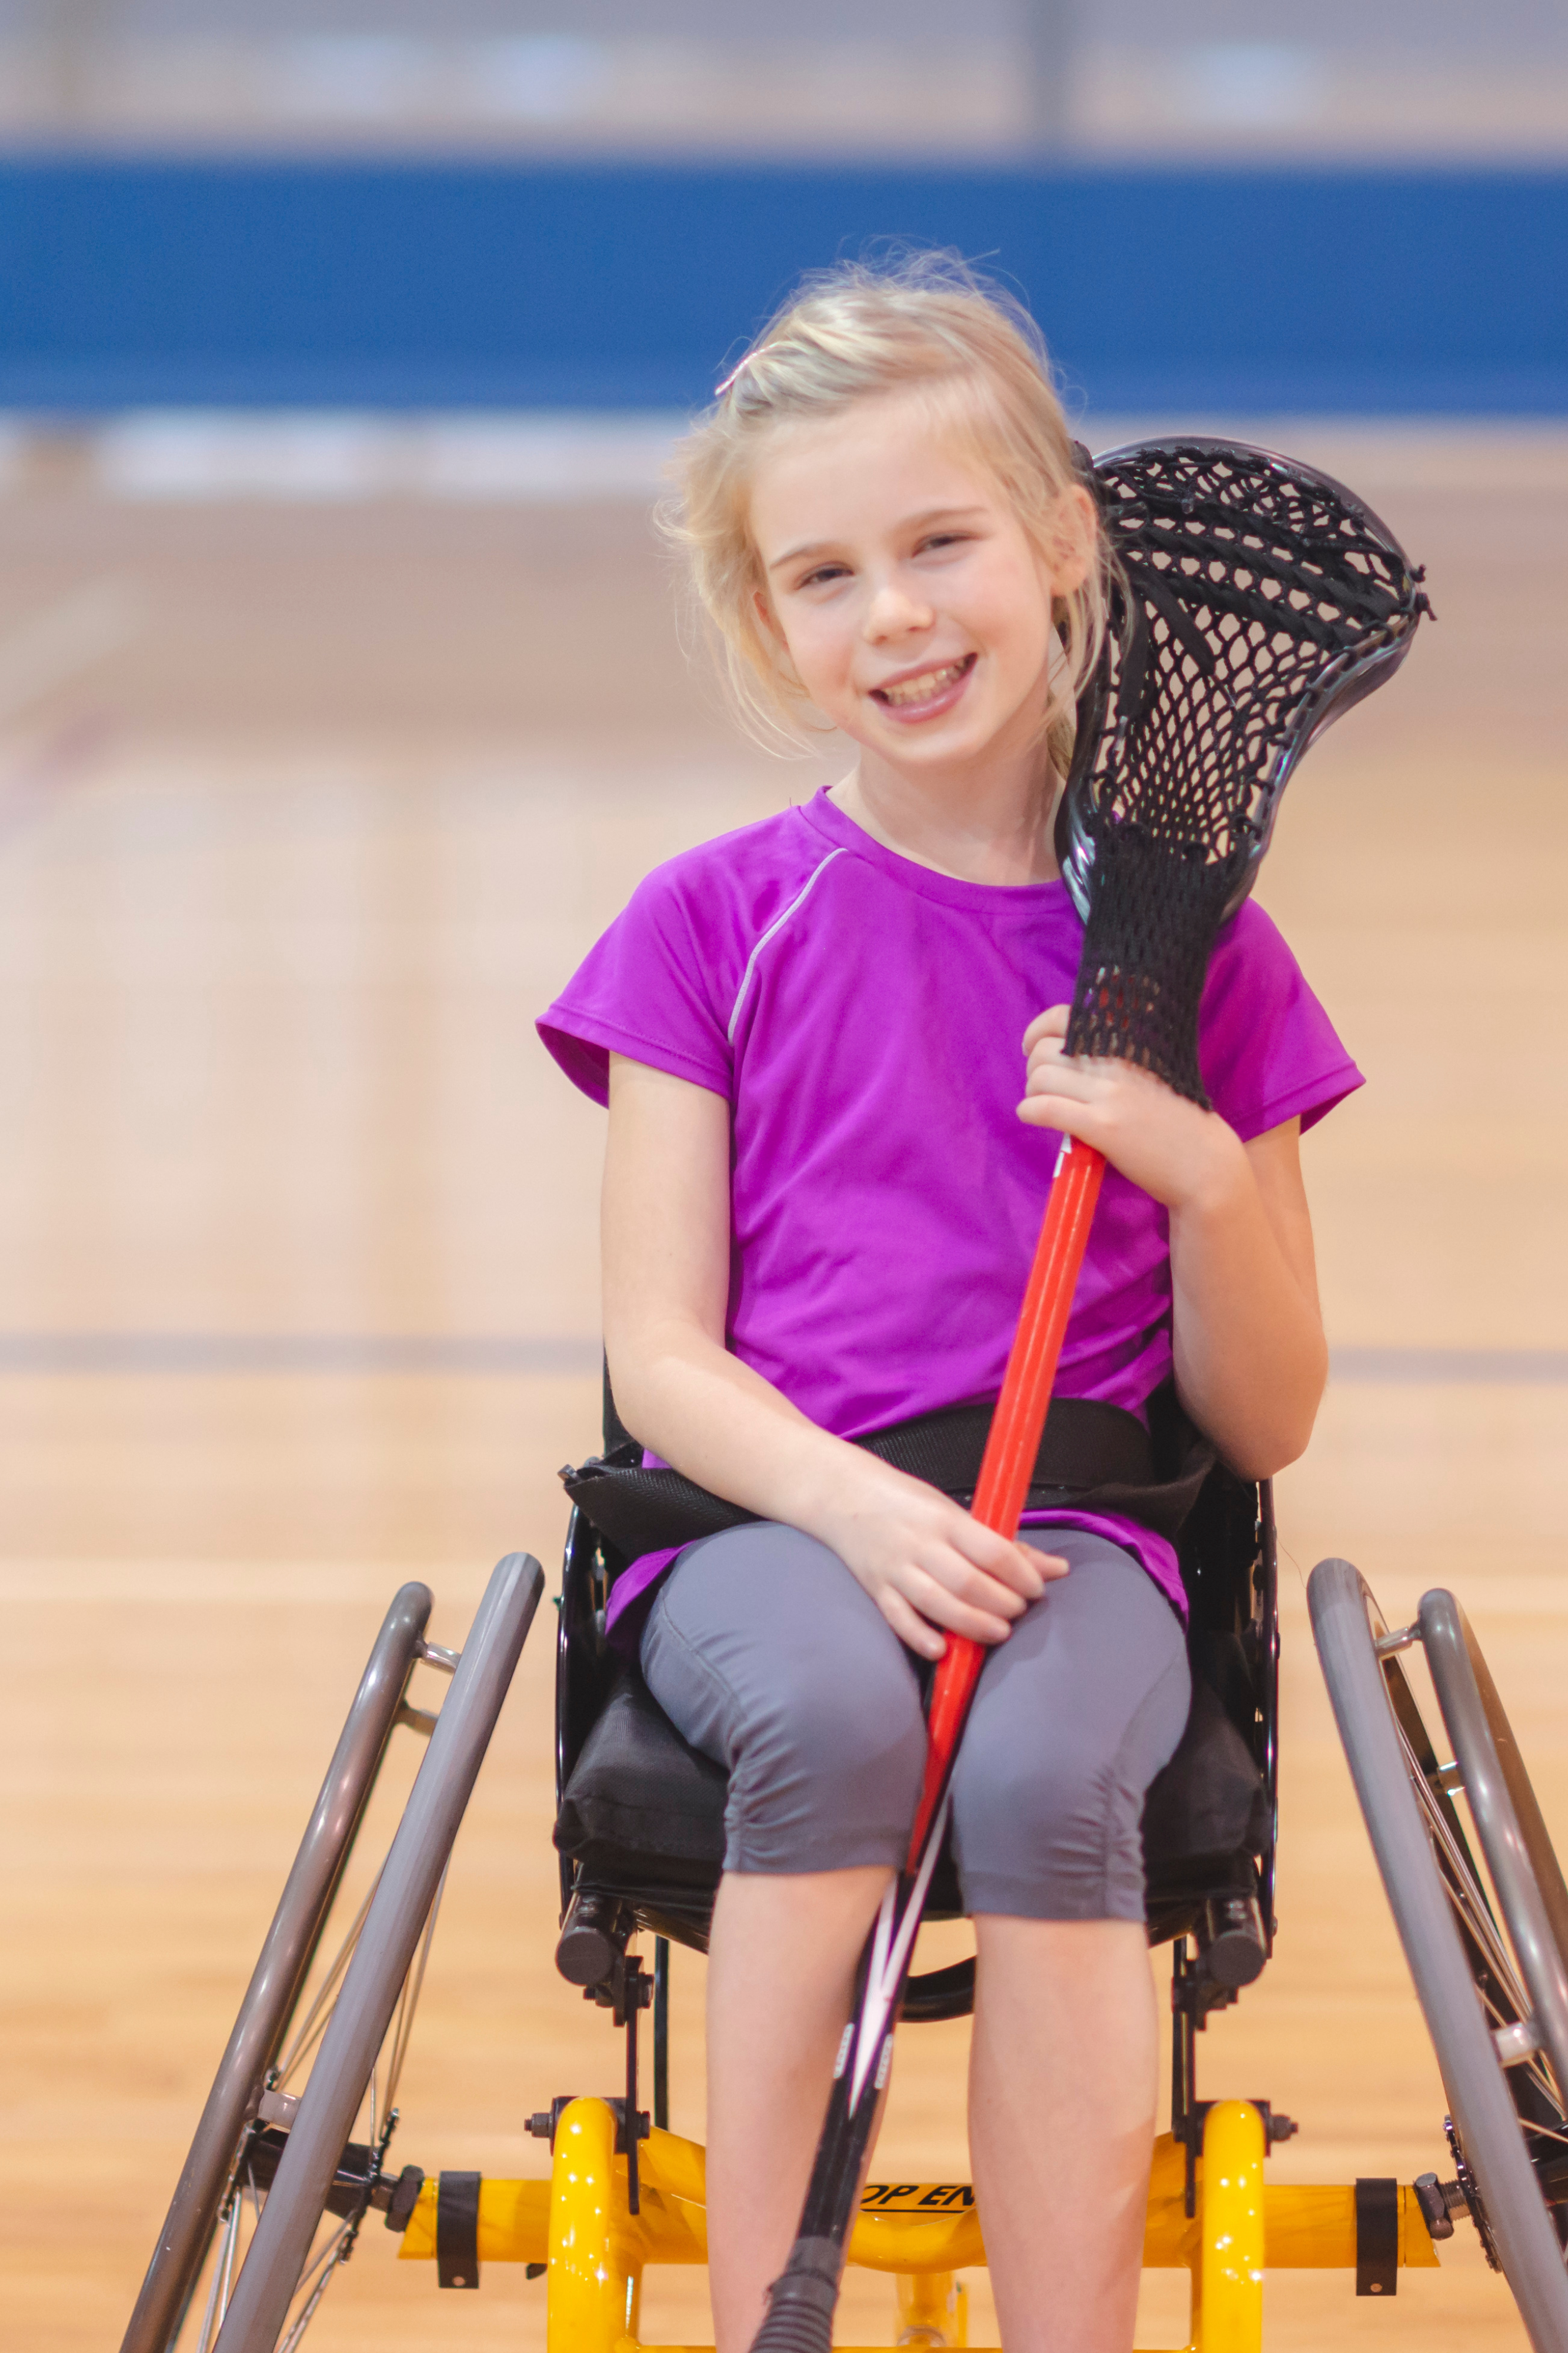 A little girl holding a lacrosse stick and smiling at the camera